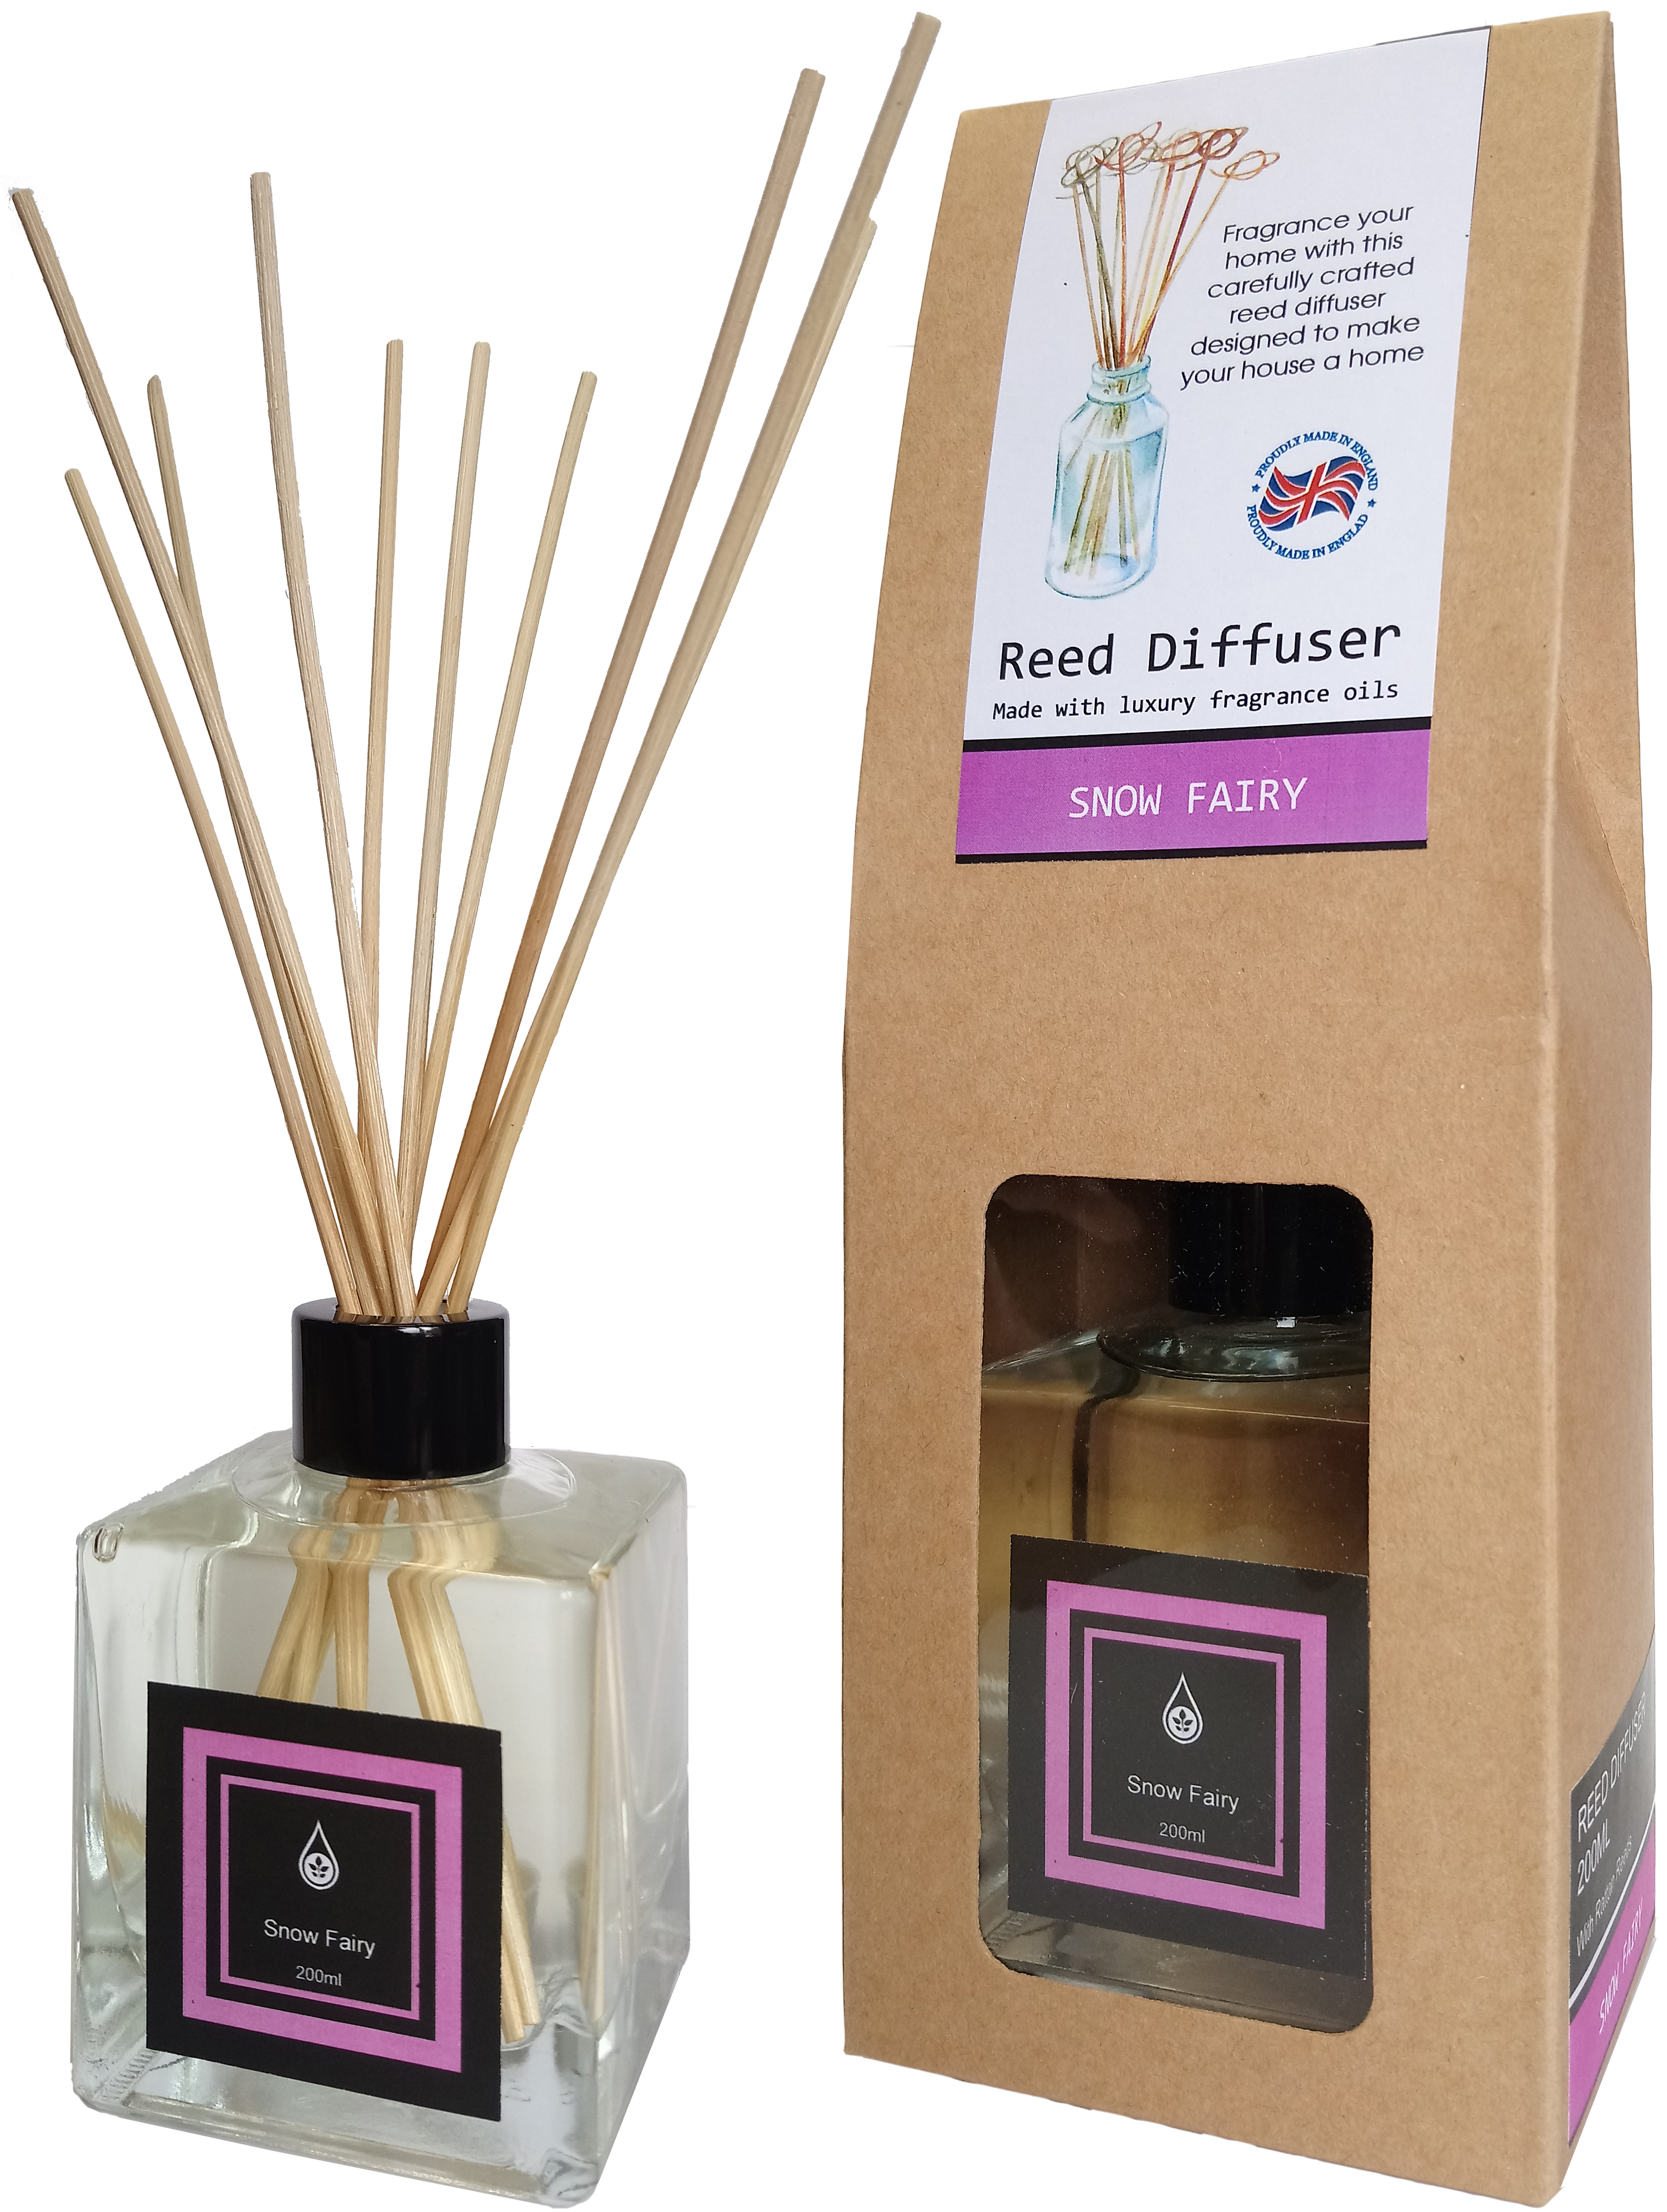 Snow Fairy Home Fragrance Reed Diffuser - 200ml With Reeds